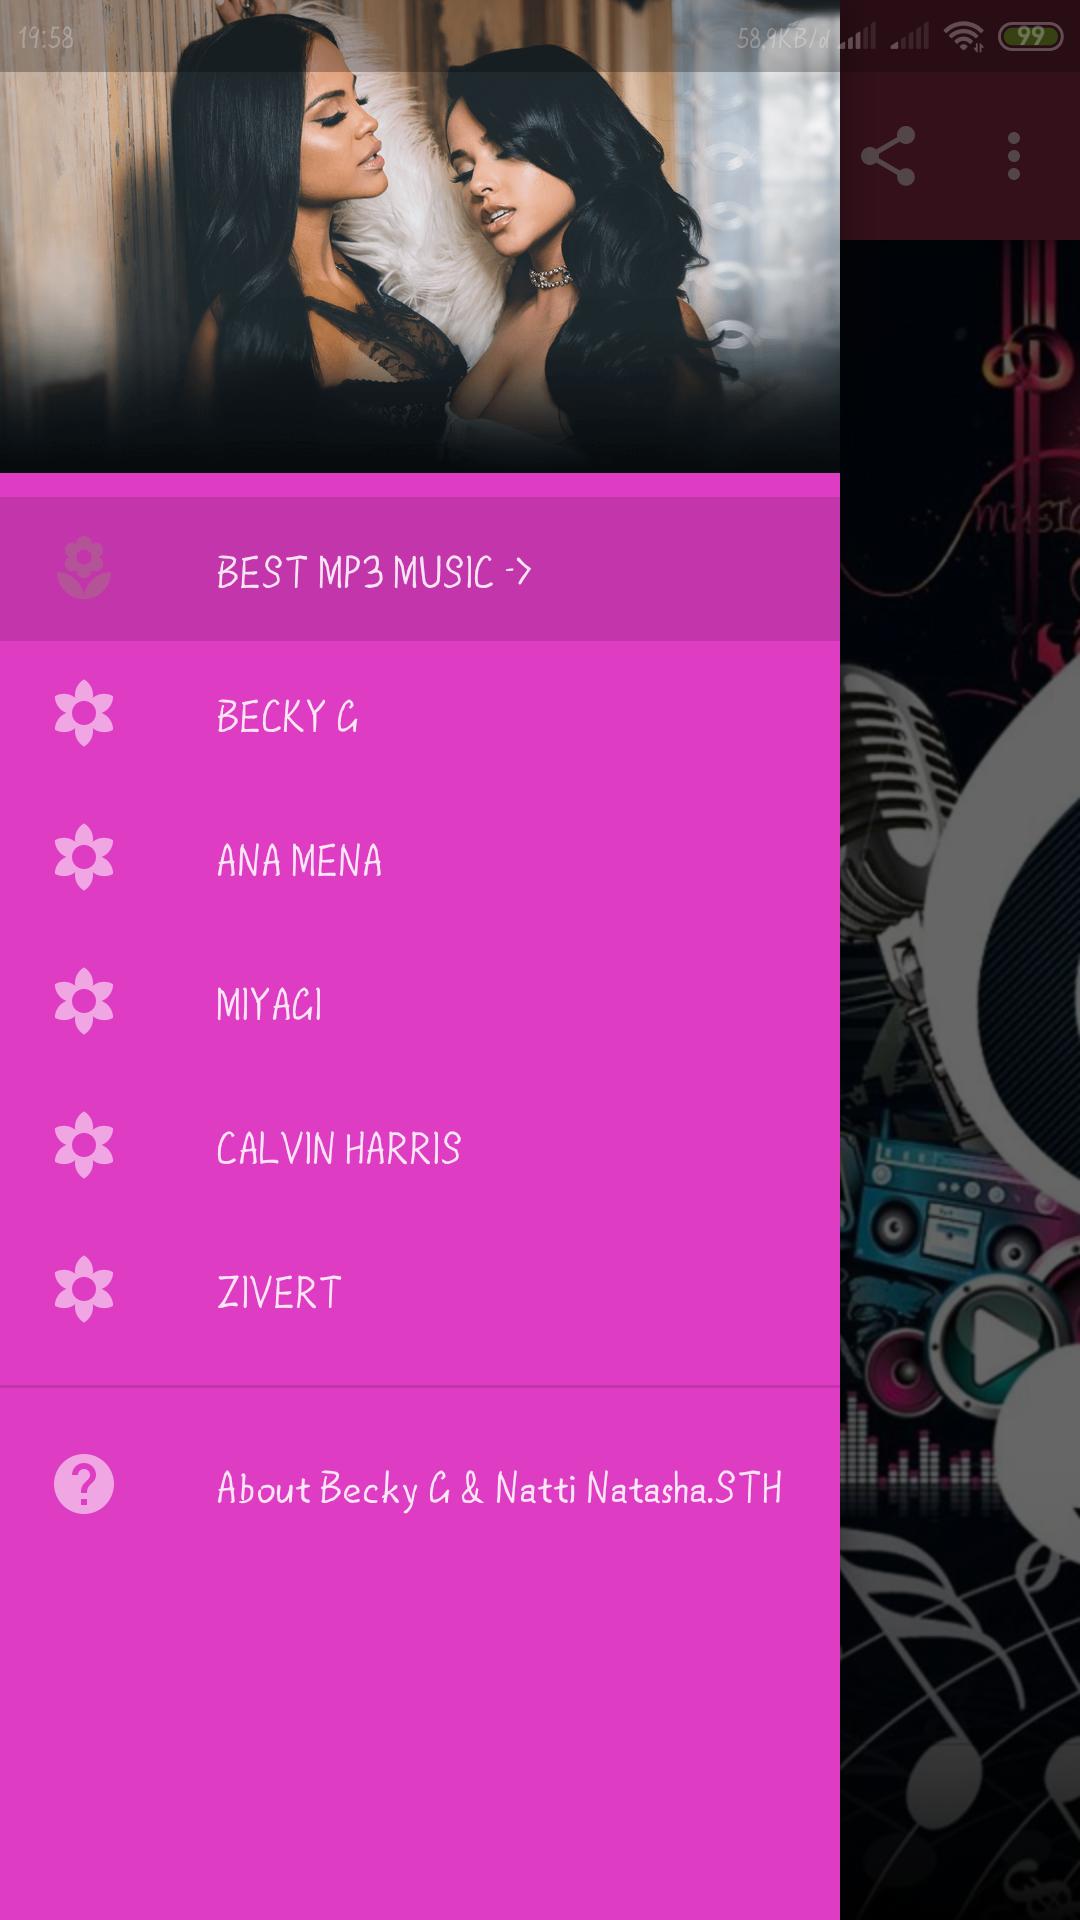 Becky G - Mala Santa for Android - APK Download